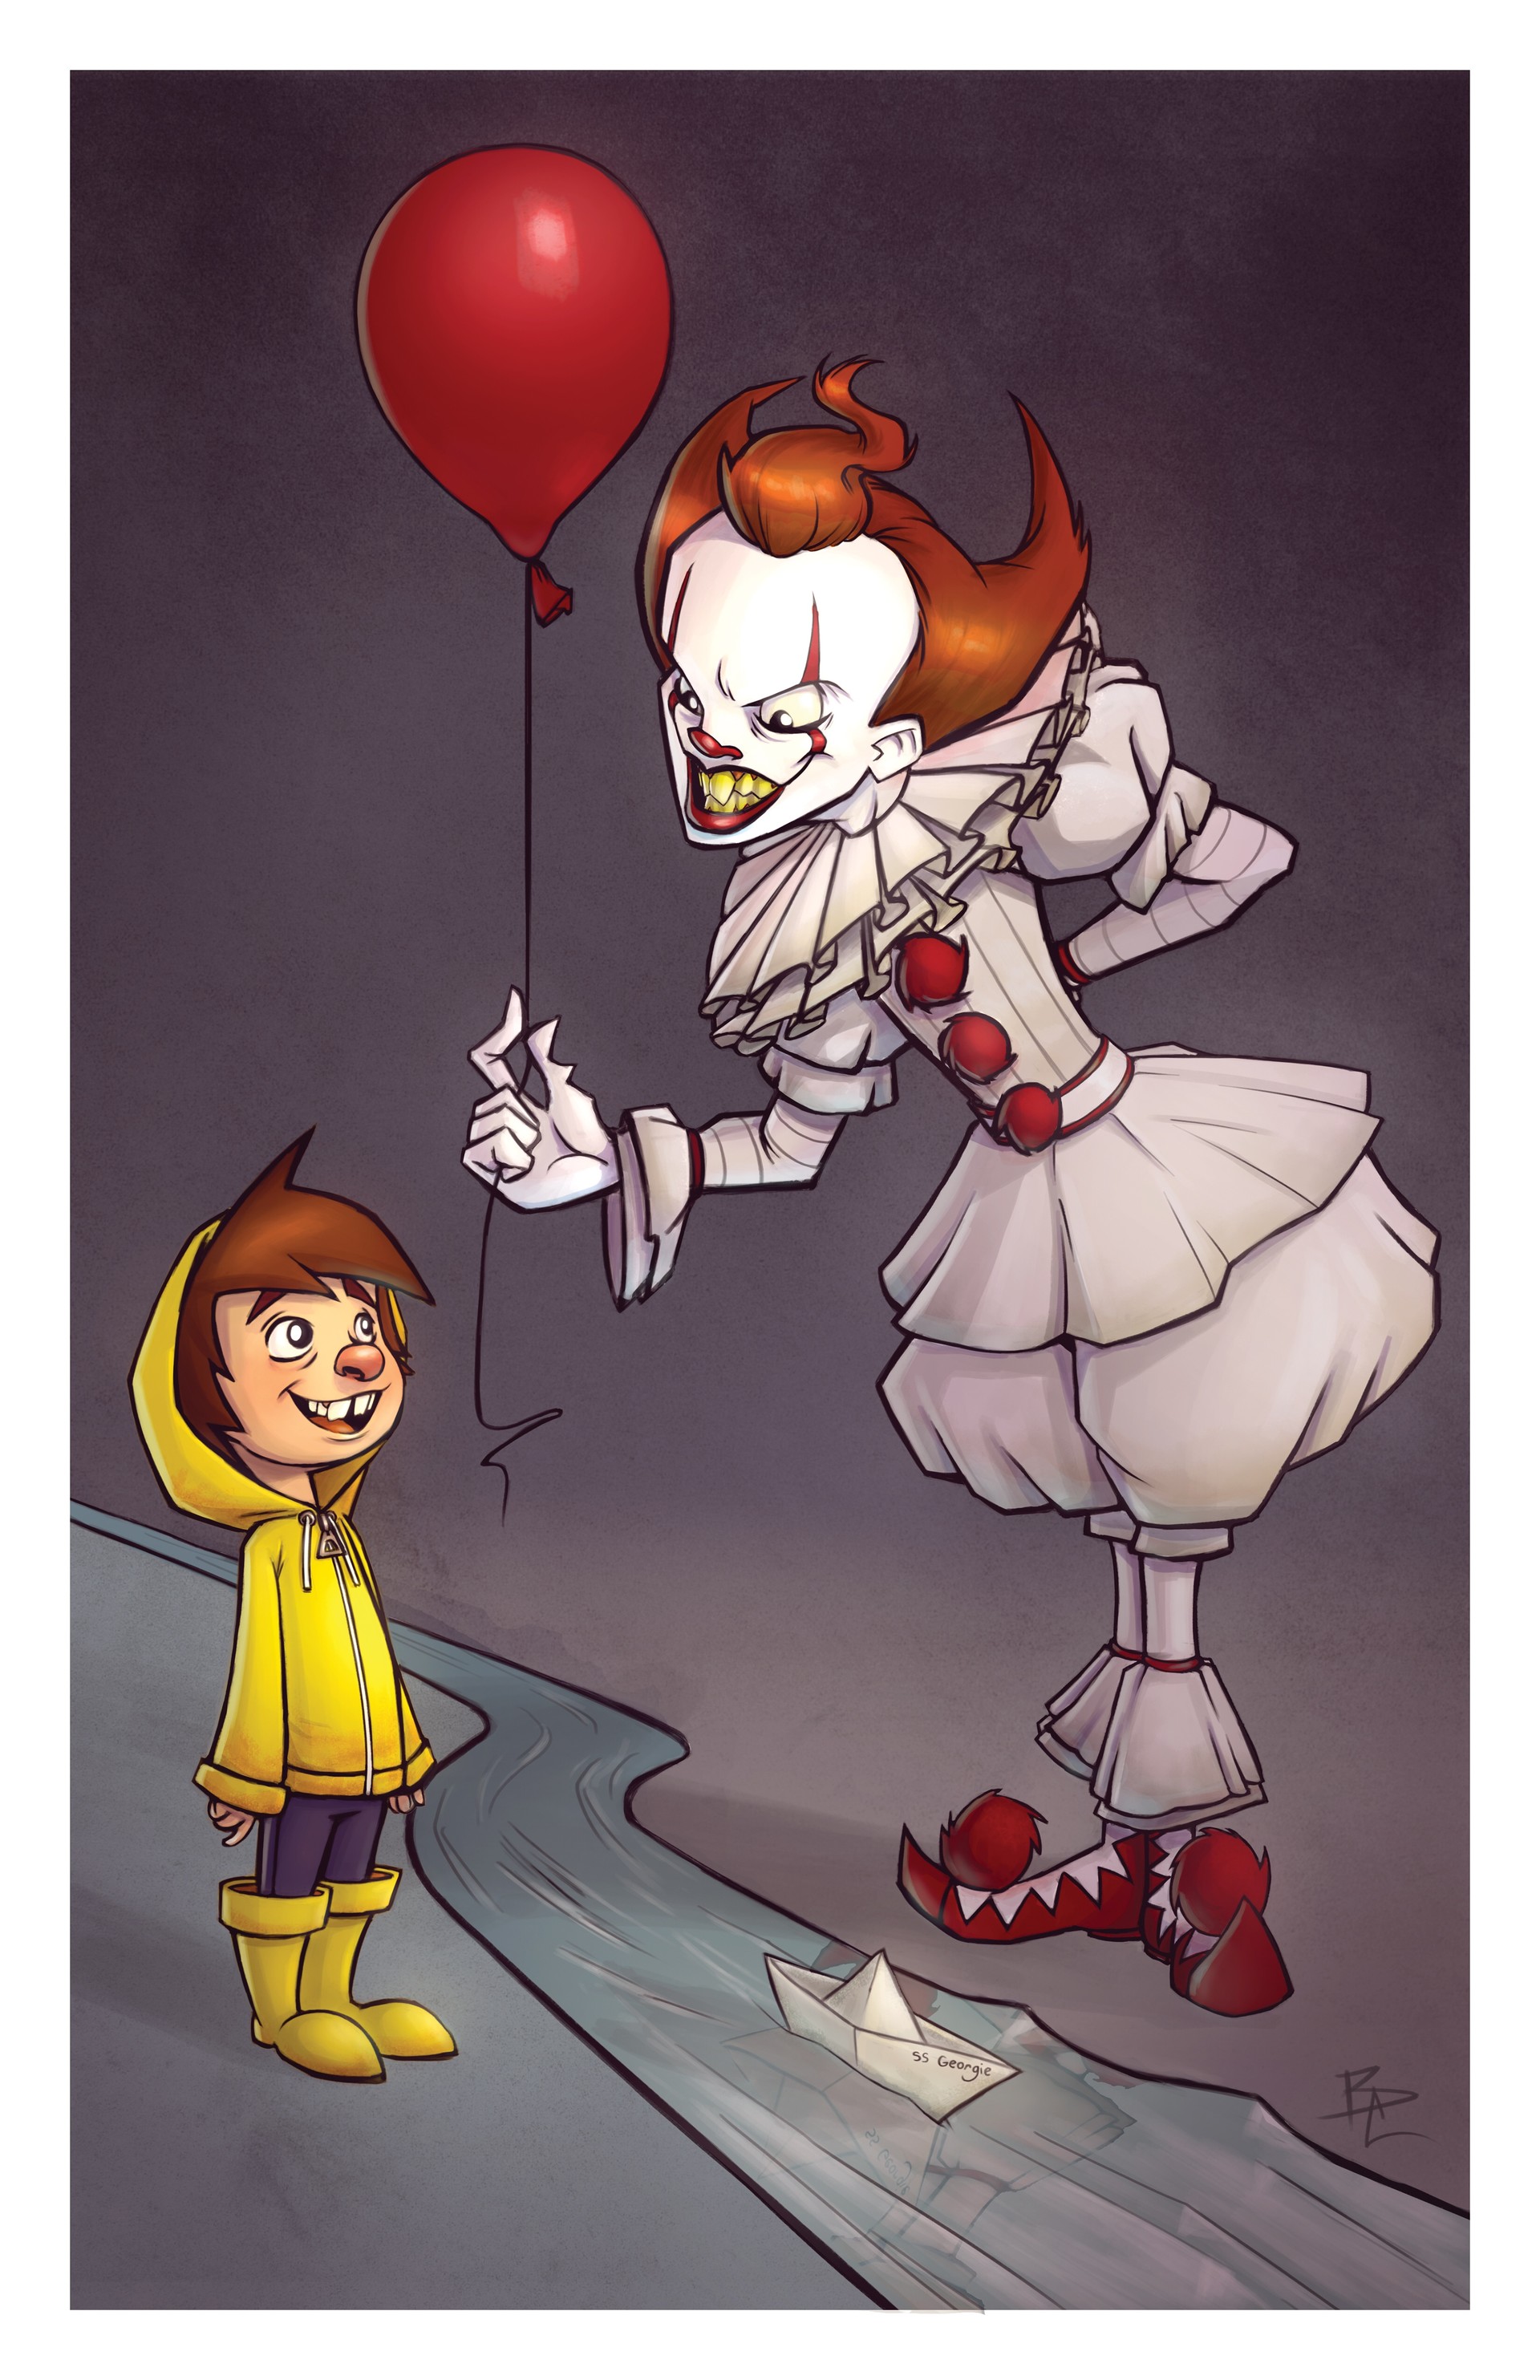 “They float,' IT growled, 'they float, Georgie, and when you’re d...